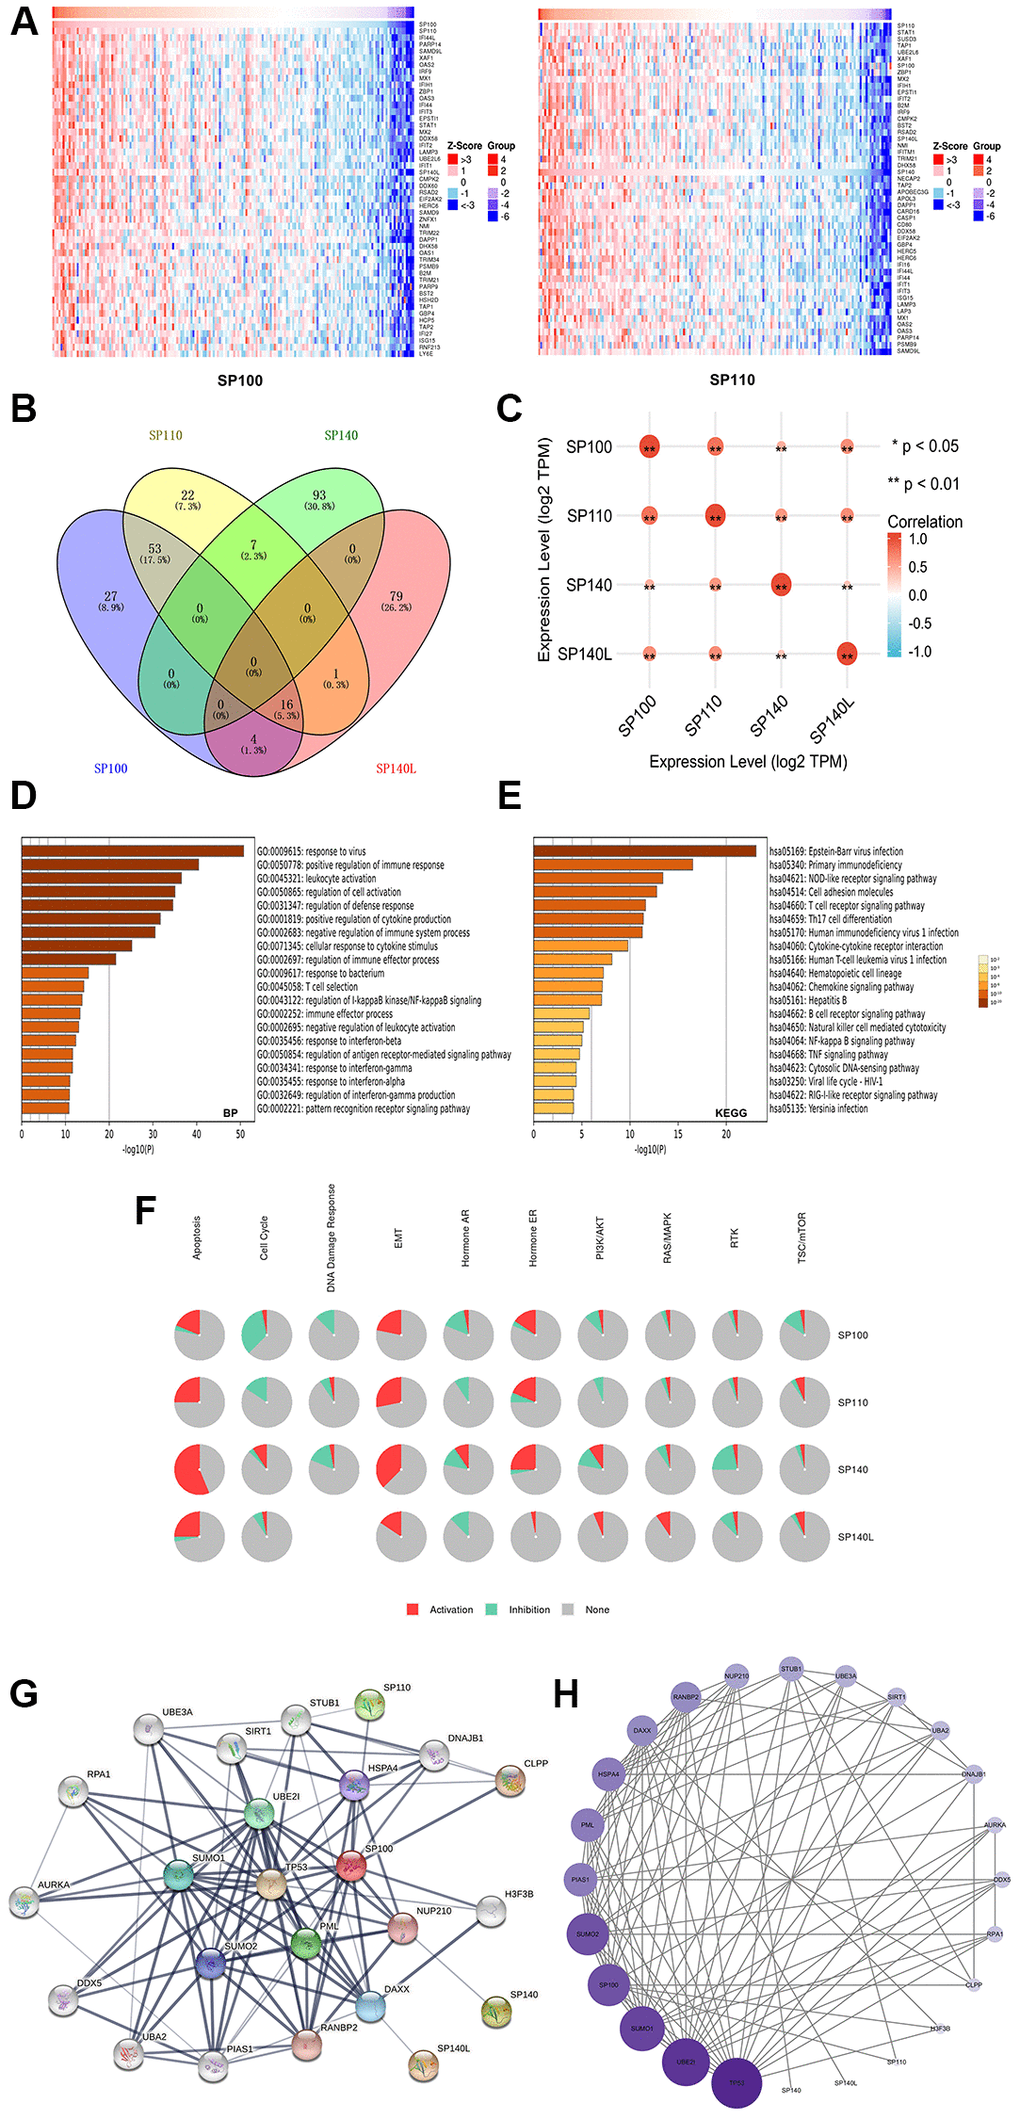 Gene enrichment analysis and PPI network construction of SP100 family in PAAD. (A) Top 50 genes co-expressed with SP100/SP110; (B) The Venn diagram of SP100 family members and their 400 co-expressed genes; (C) SP100 family members are also co-expressed among themselves. *p **p D) The GO enrichment of the BP terms of the SP100 family and its 400 co-expressed genes; (E) The KEGG enrichment of the SP100 family and its 400 co-expressed genes; (F) SP100 family played an activating role in a variety of oncogenic pathways; (G, H) TP53 played an important role in PPI network which was closely related to SP100 family.